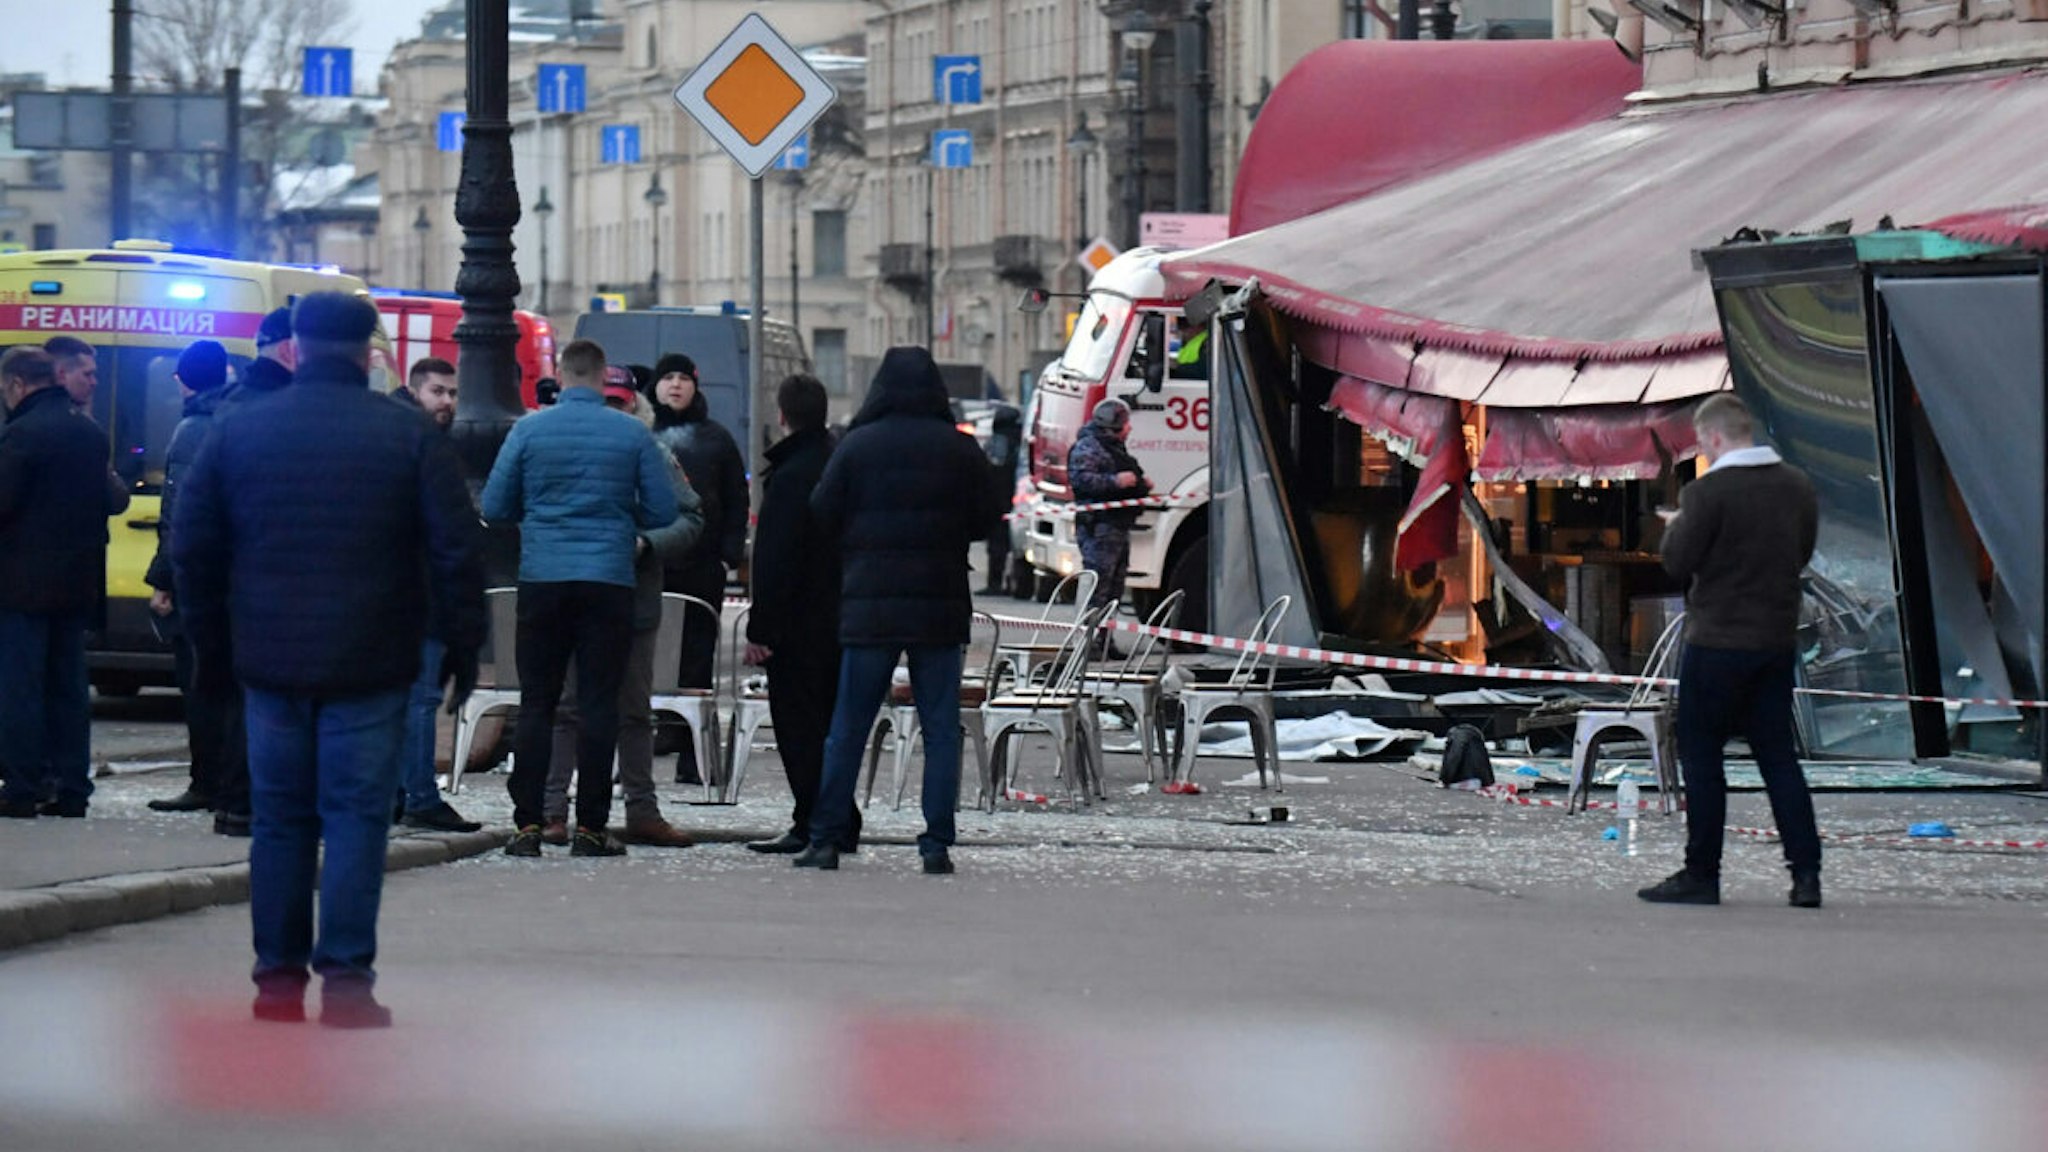 Russian police investigators inspect a damaged 'Street bar' cafe in a blast in Saint Petersburg on April 2, 2023. - A leading Russian military blogger was killed on April 2, 2023 in an explosion at a cafe in Russia's second-largest city of Saint Petersburg, the interior ministry said.